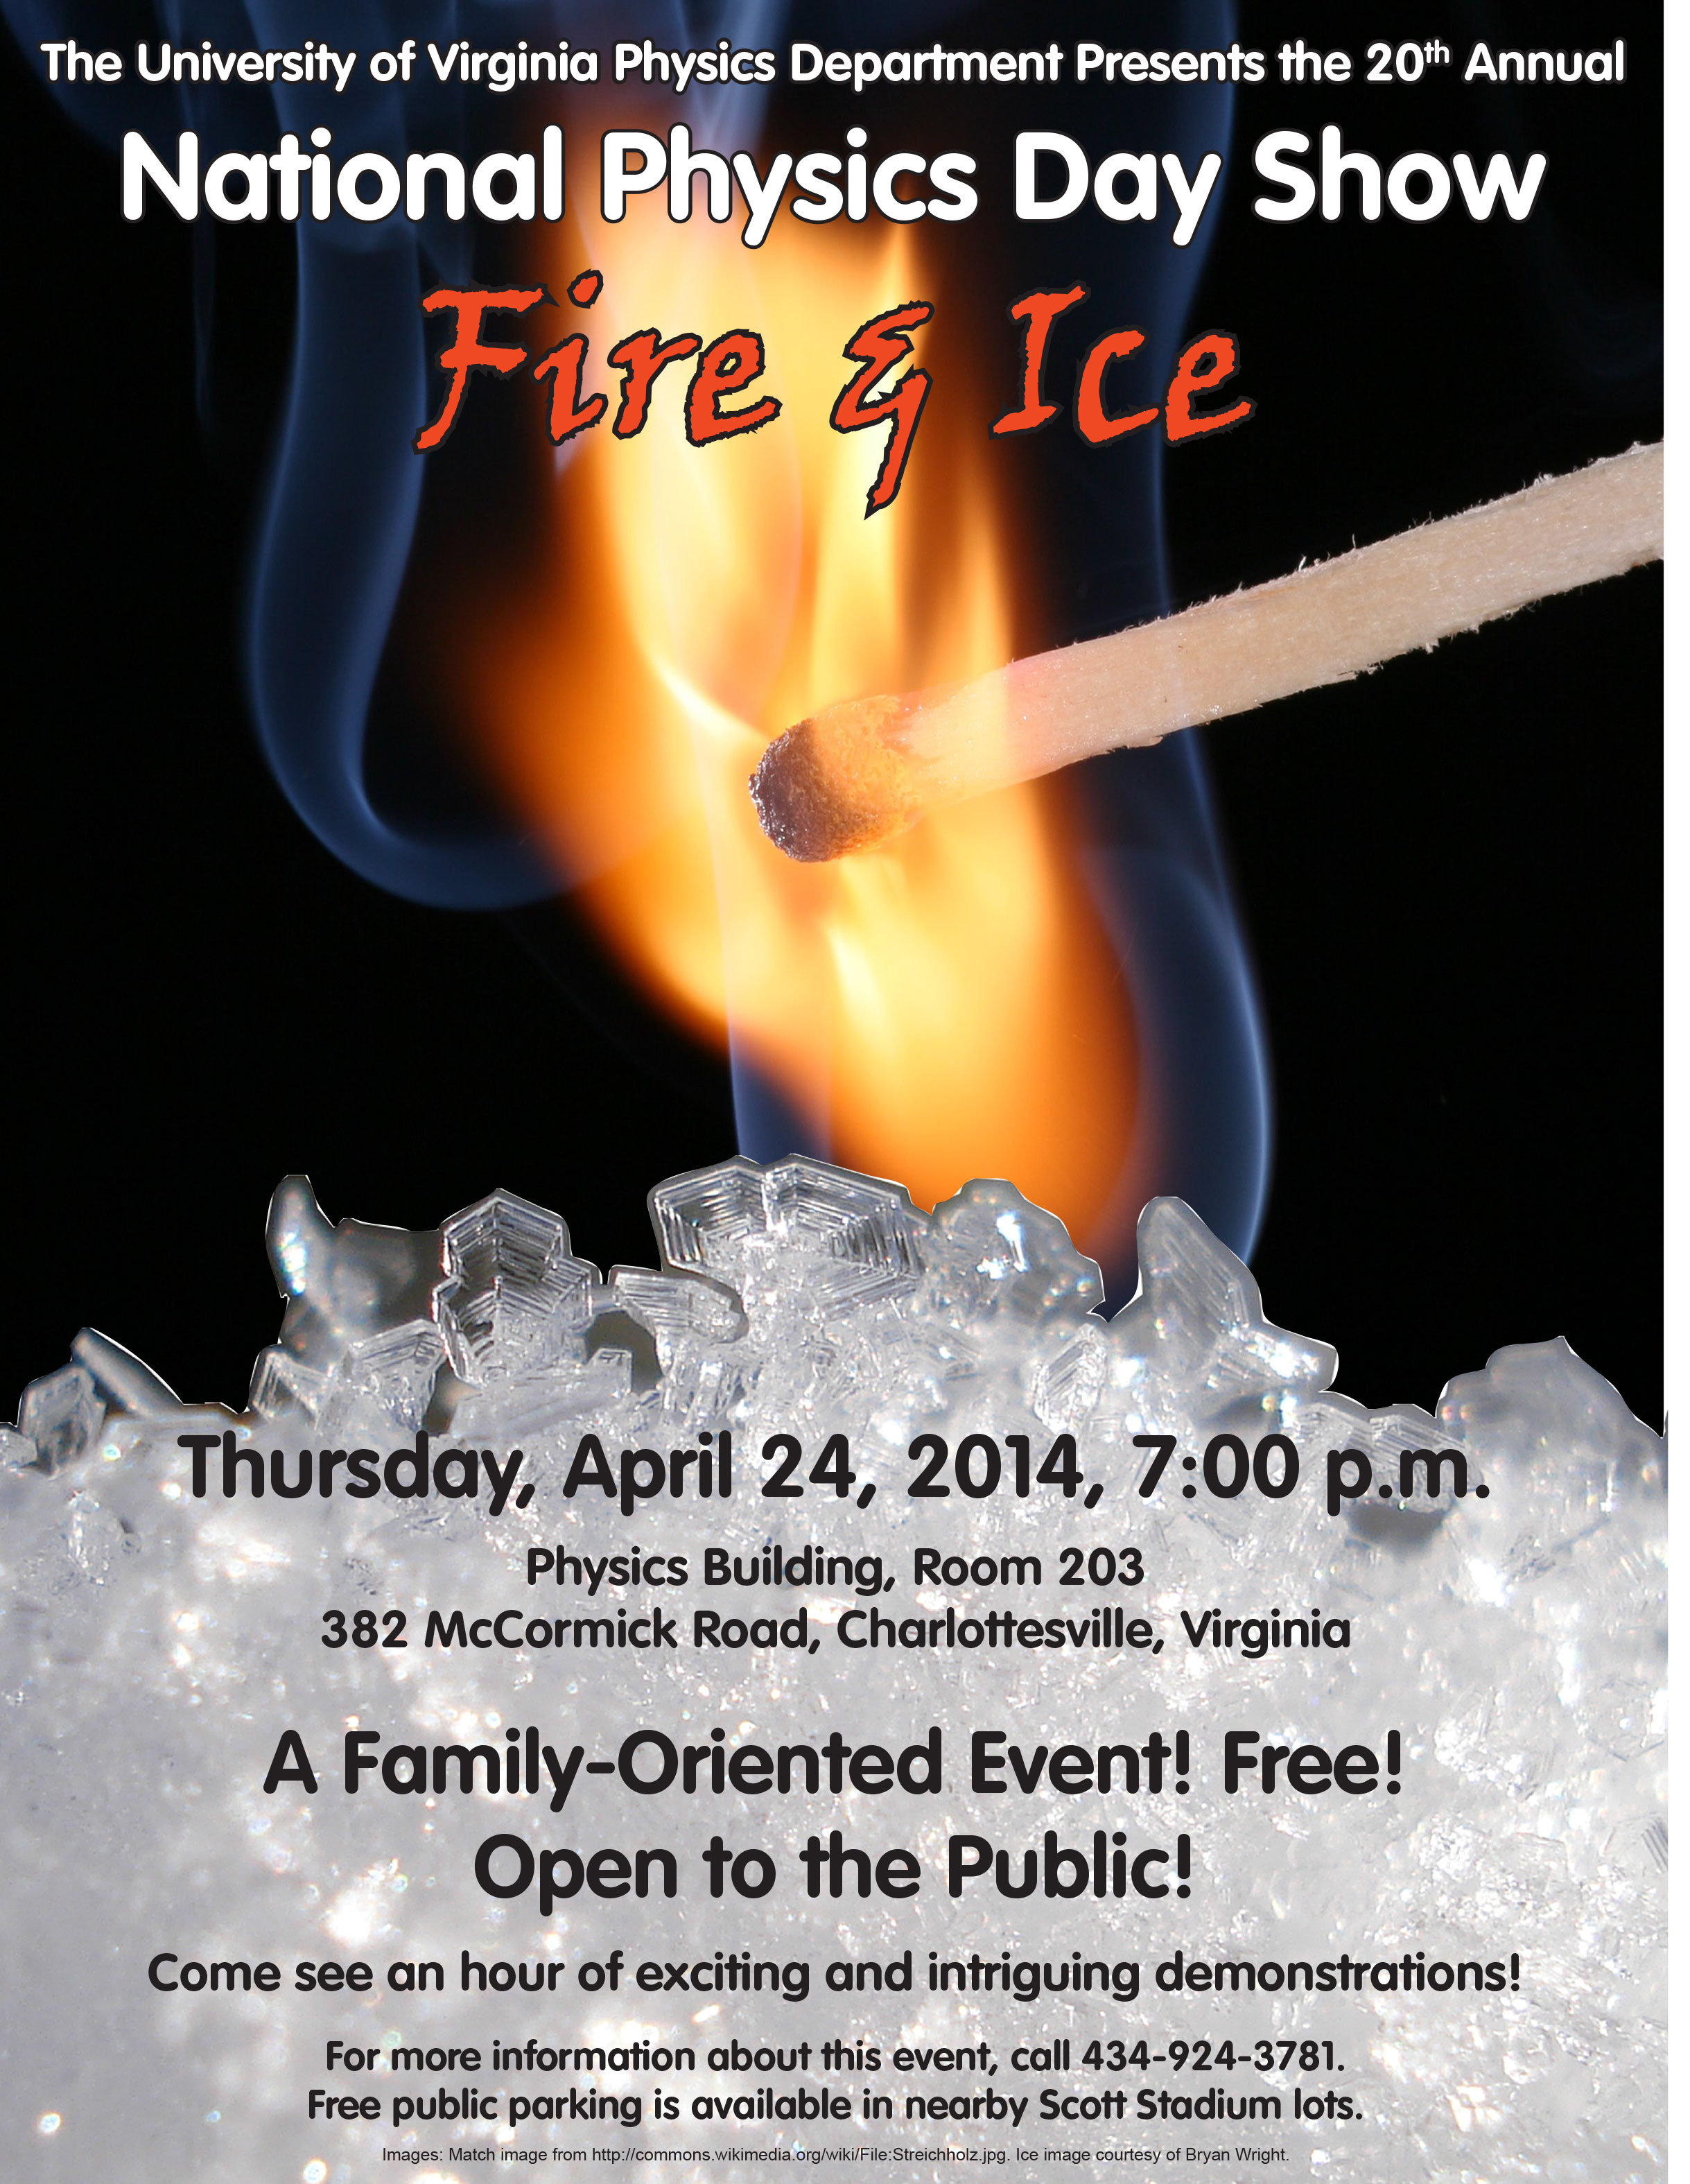 text reads: The University of Virginia Physics Department Presents the 20th Annual National Physics Day Show Fire & Ice. Thursday, April 24, 2014, 7pm. Physics building, room 203 382 McCornick Road, Charlottesville, Virginia. A family-oriented Event! Free! Open to the Public!  Come see an hour of exciting and intriguing demonstrations! For more information about this event, call 434-924-3781.  Free Public parking is available in nearby Scott Stadium lots